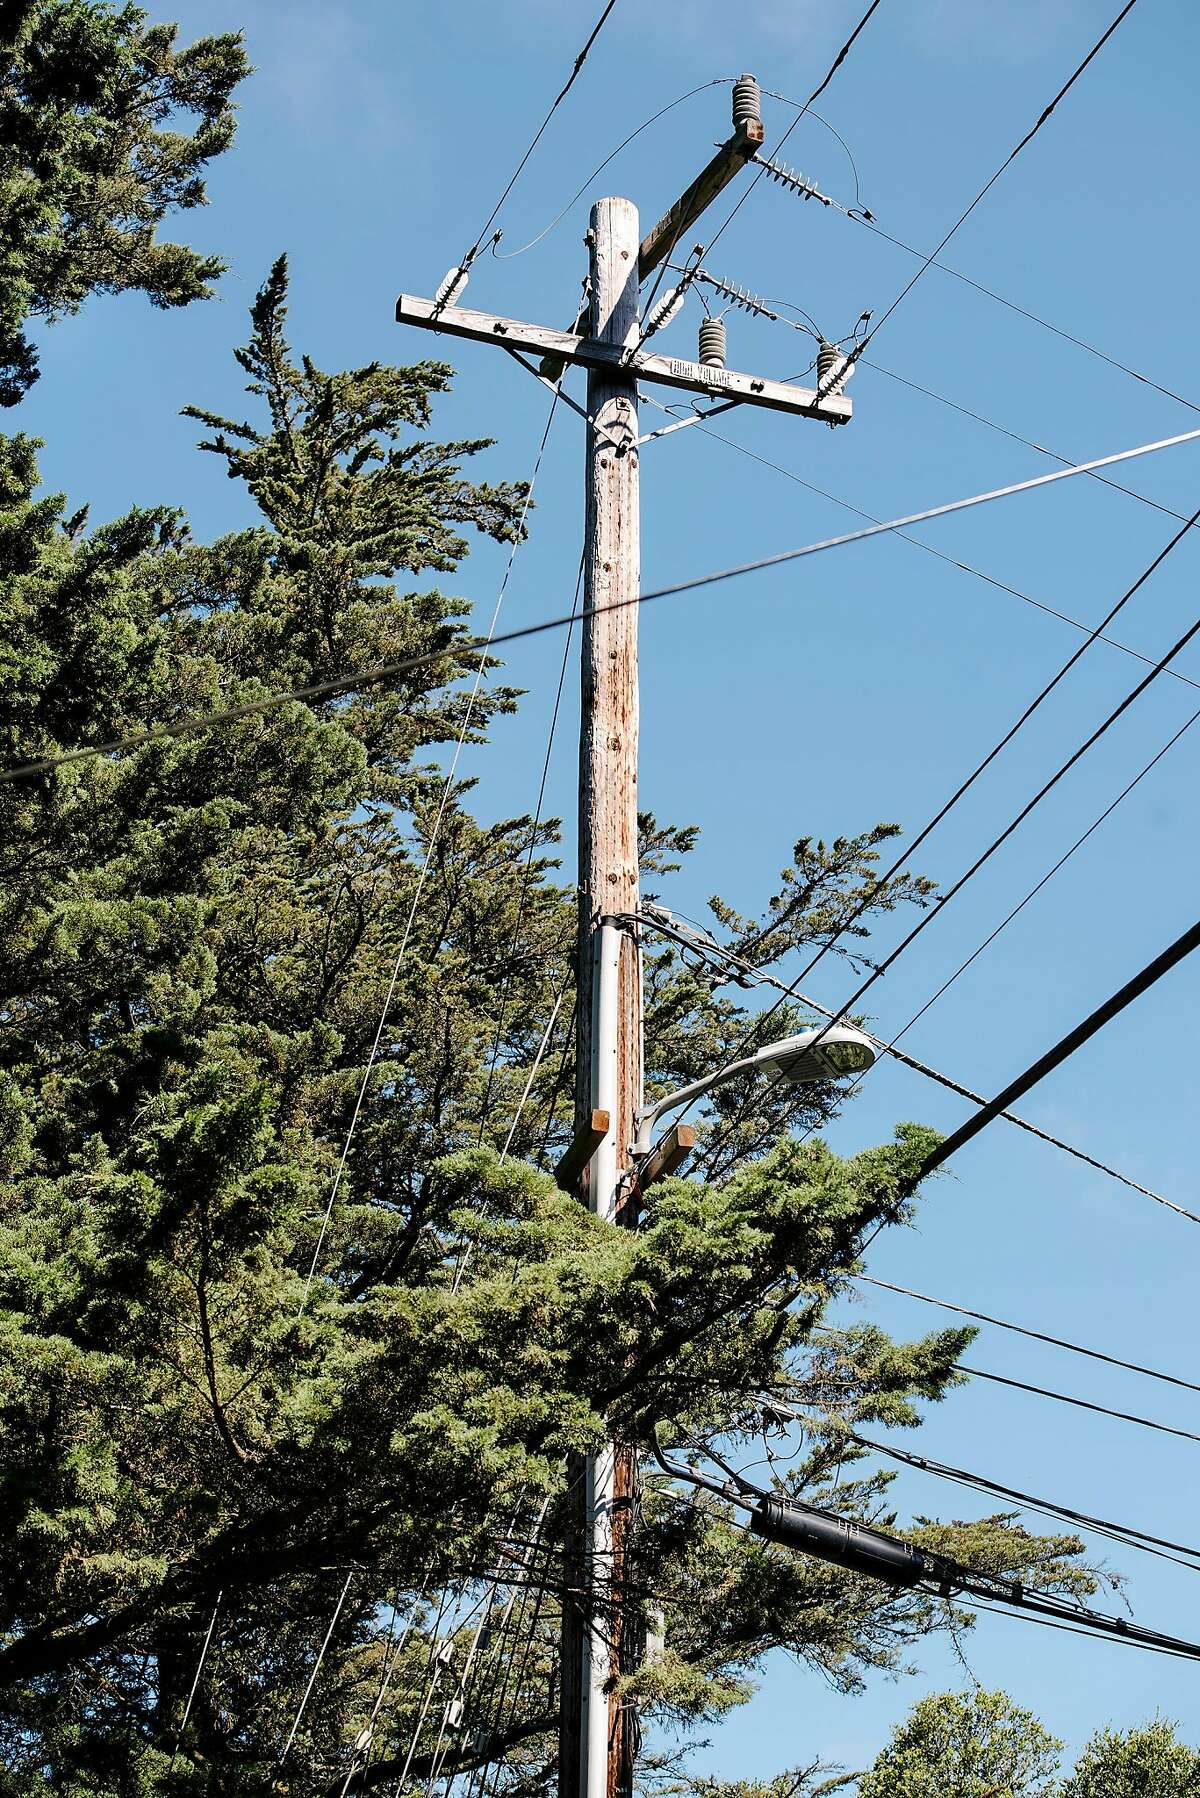 A power pole stands next to trees as work crews from Mowbray's Tree Service, contracted by PG&E to handle vegetation management, prepare to trim back trees along Skyline Blvd. in Oakland, CA on June 26th, 2019.